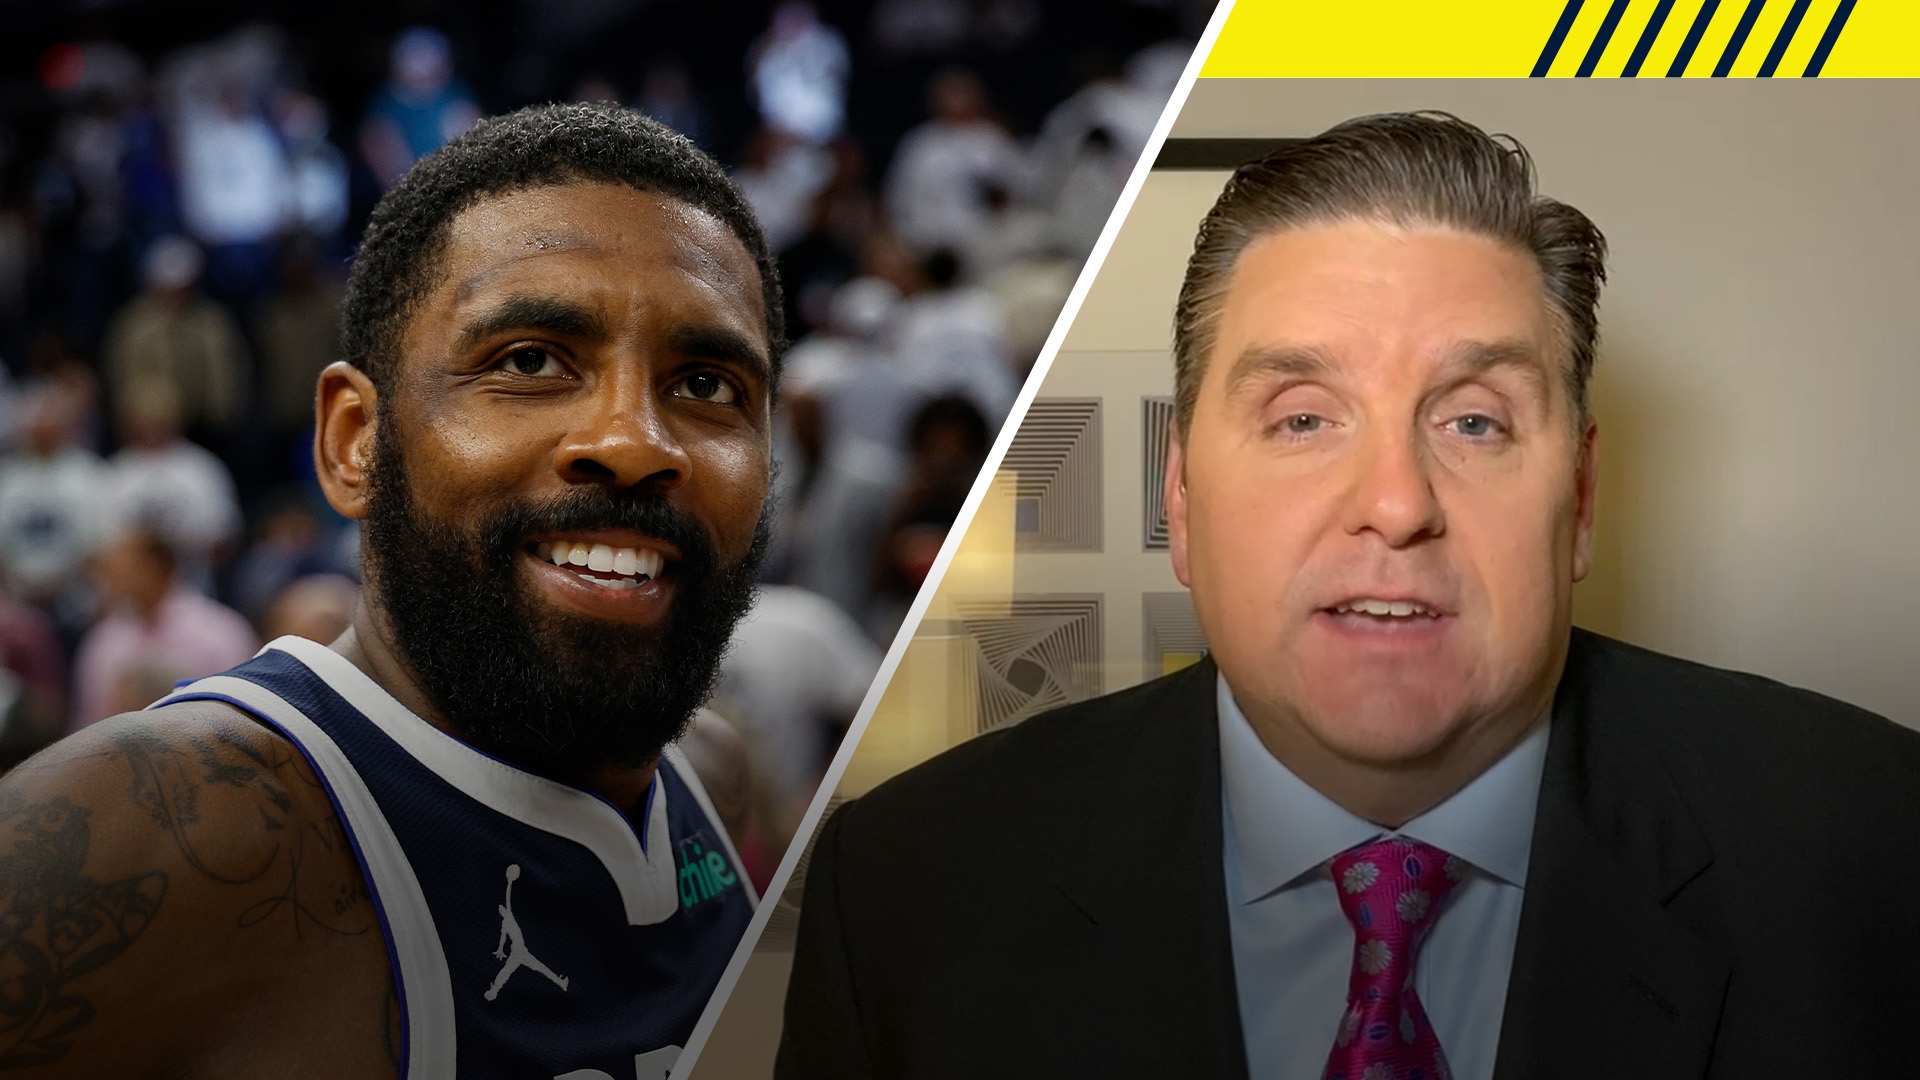 Windhorst: Kyrie Irving is 'focused on making sure Luka can thrive'